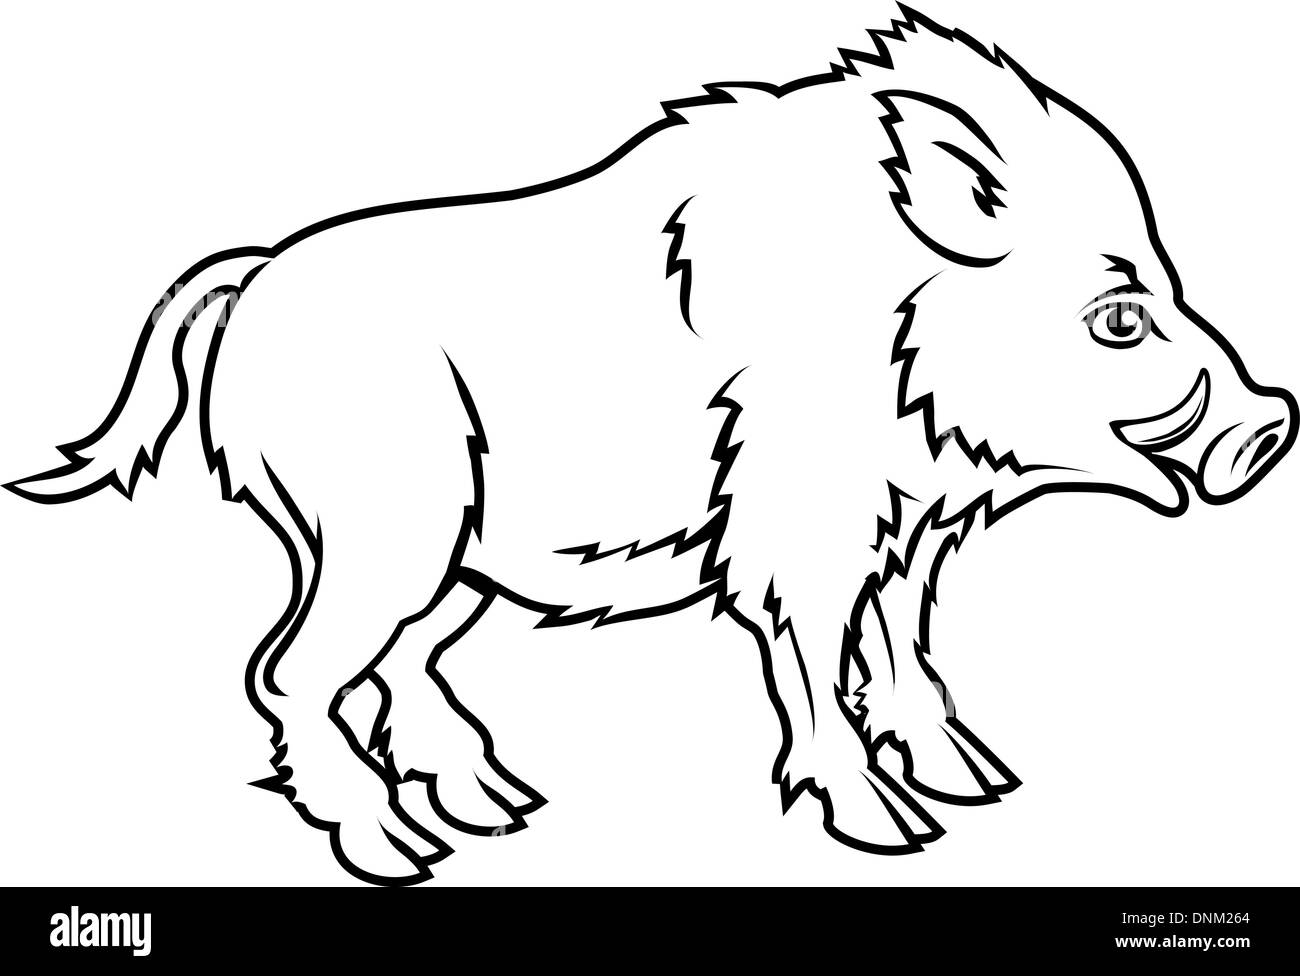 Tribal Boar Tattoo Vector Images 93